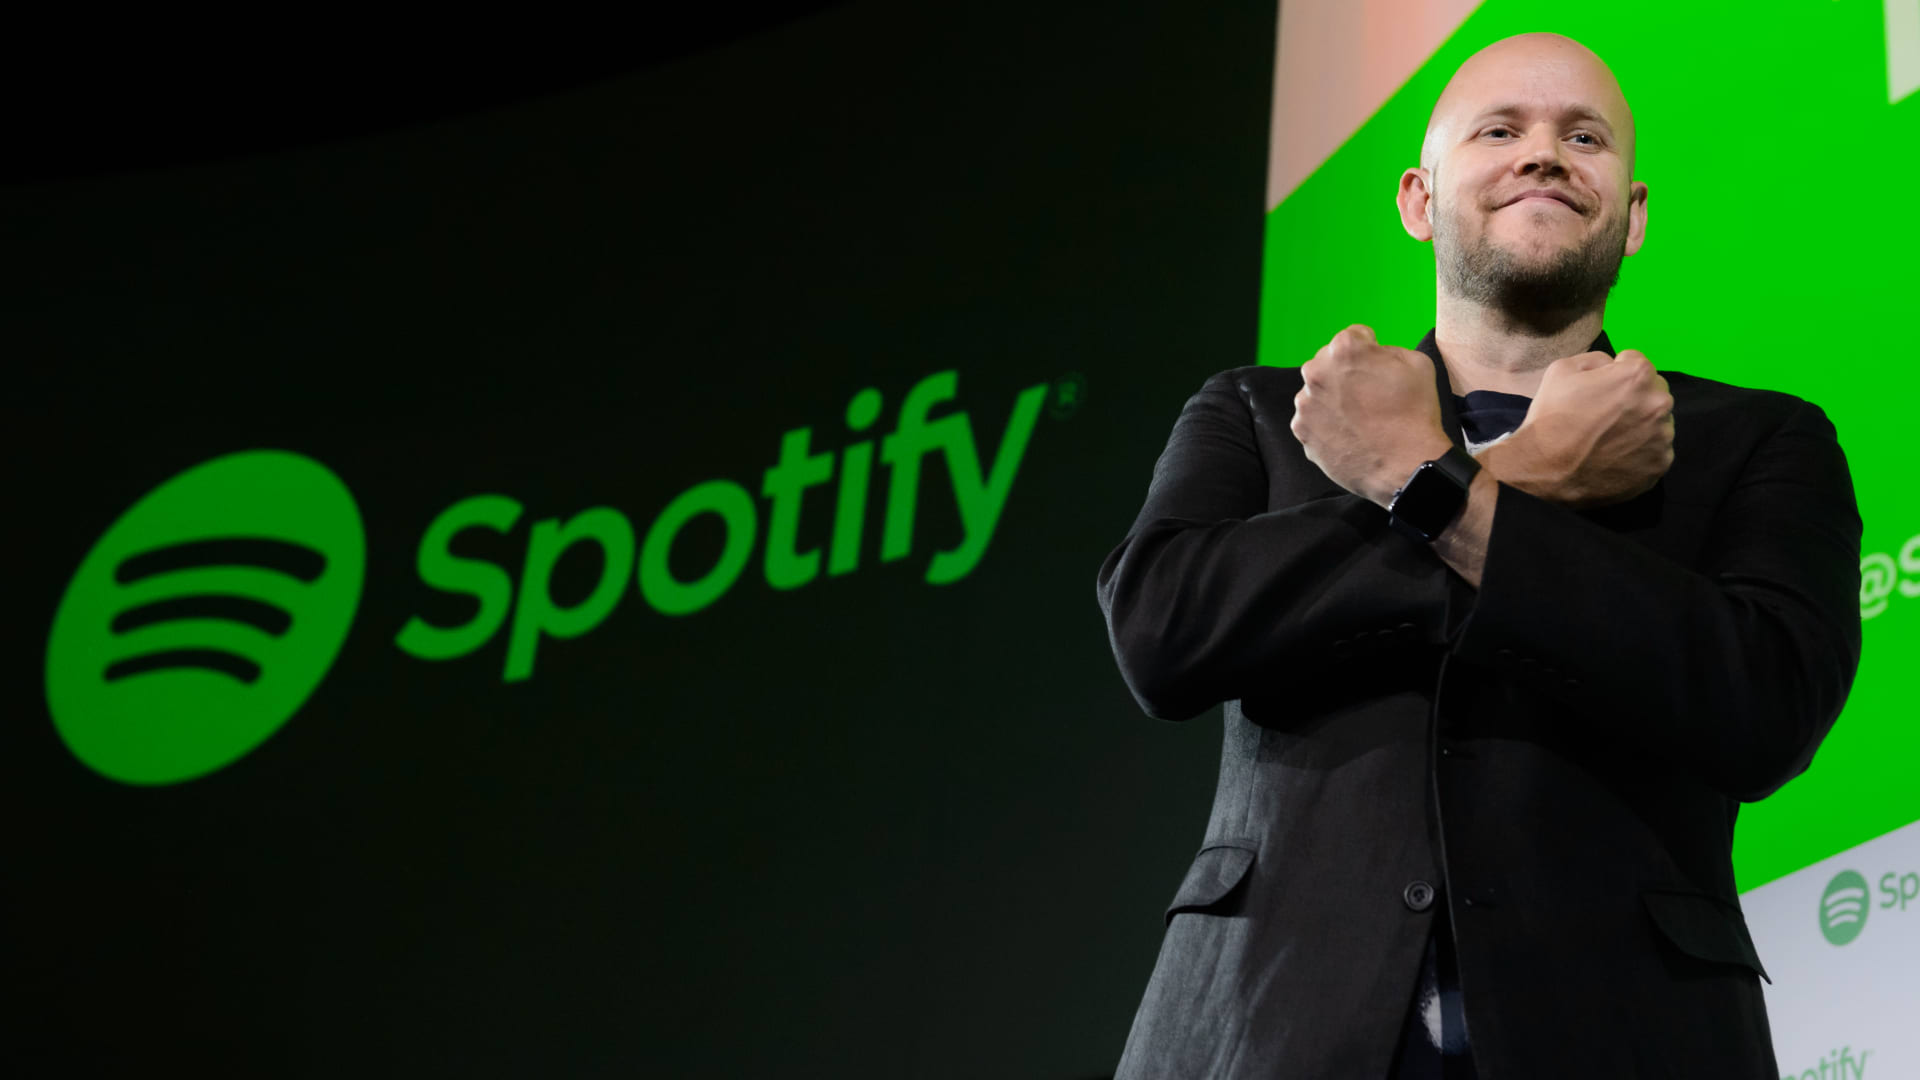 Spotify to buy podcast ad company Megaphone for $235 million